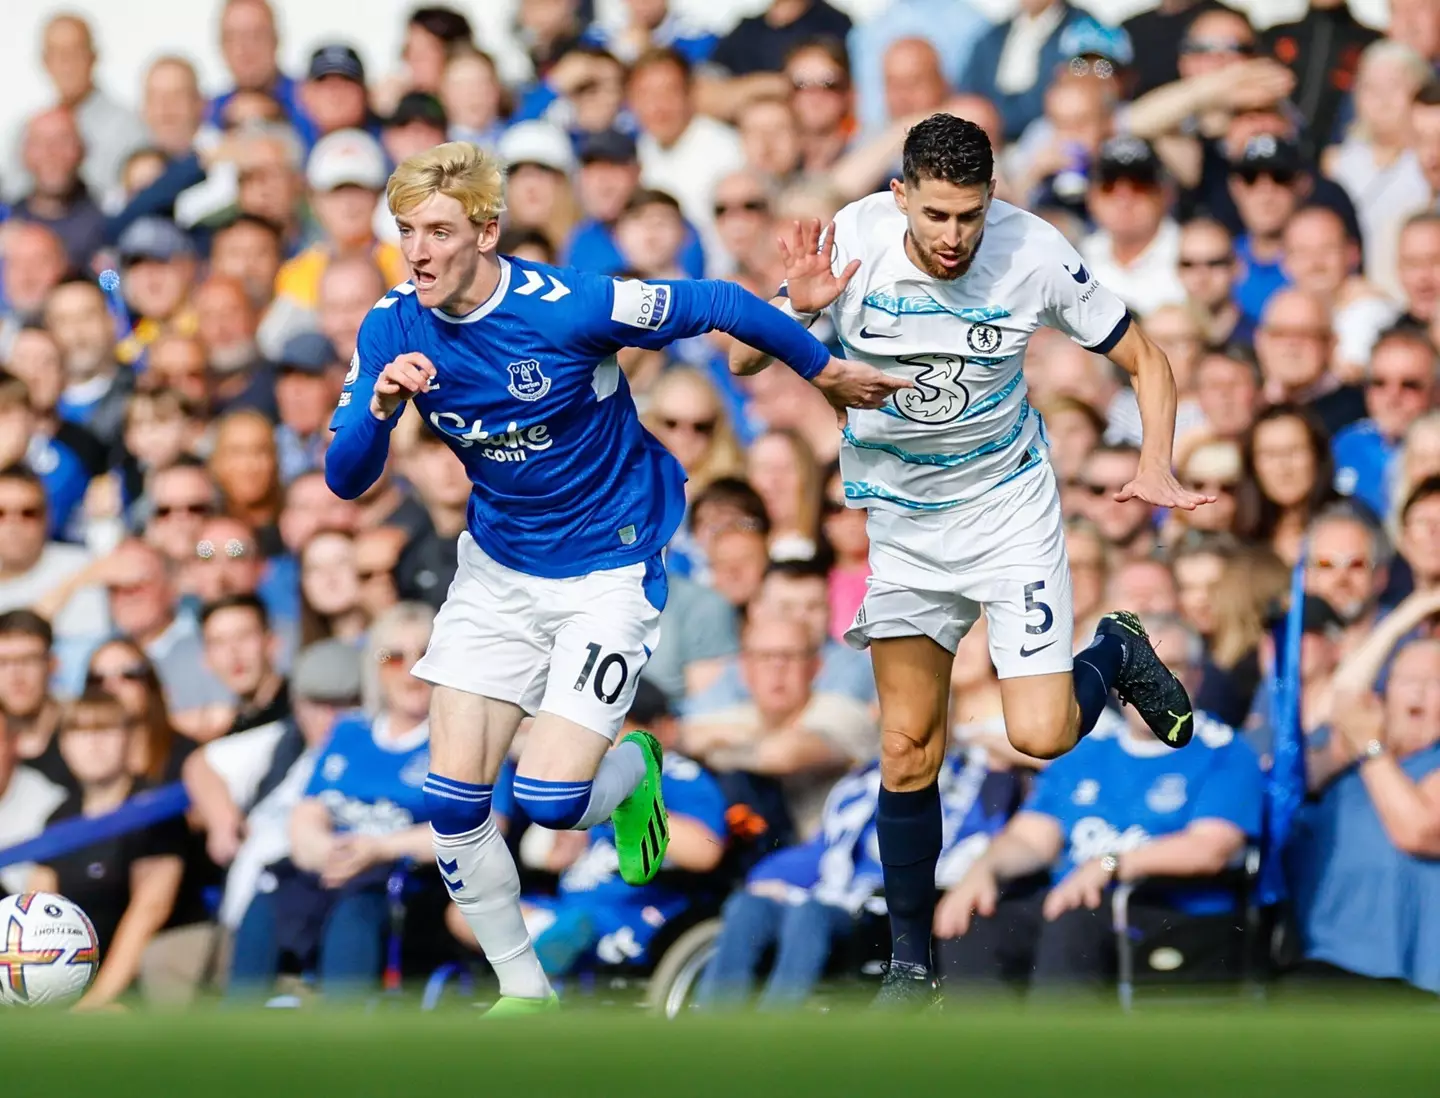 Gordon attempting to get away from Chelsea midfielder Jorginho in this season's encounter at Goodison Park. (Image